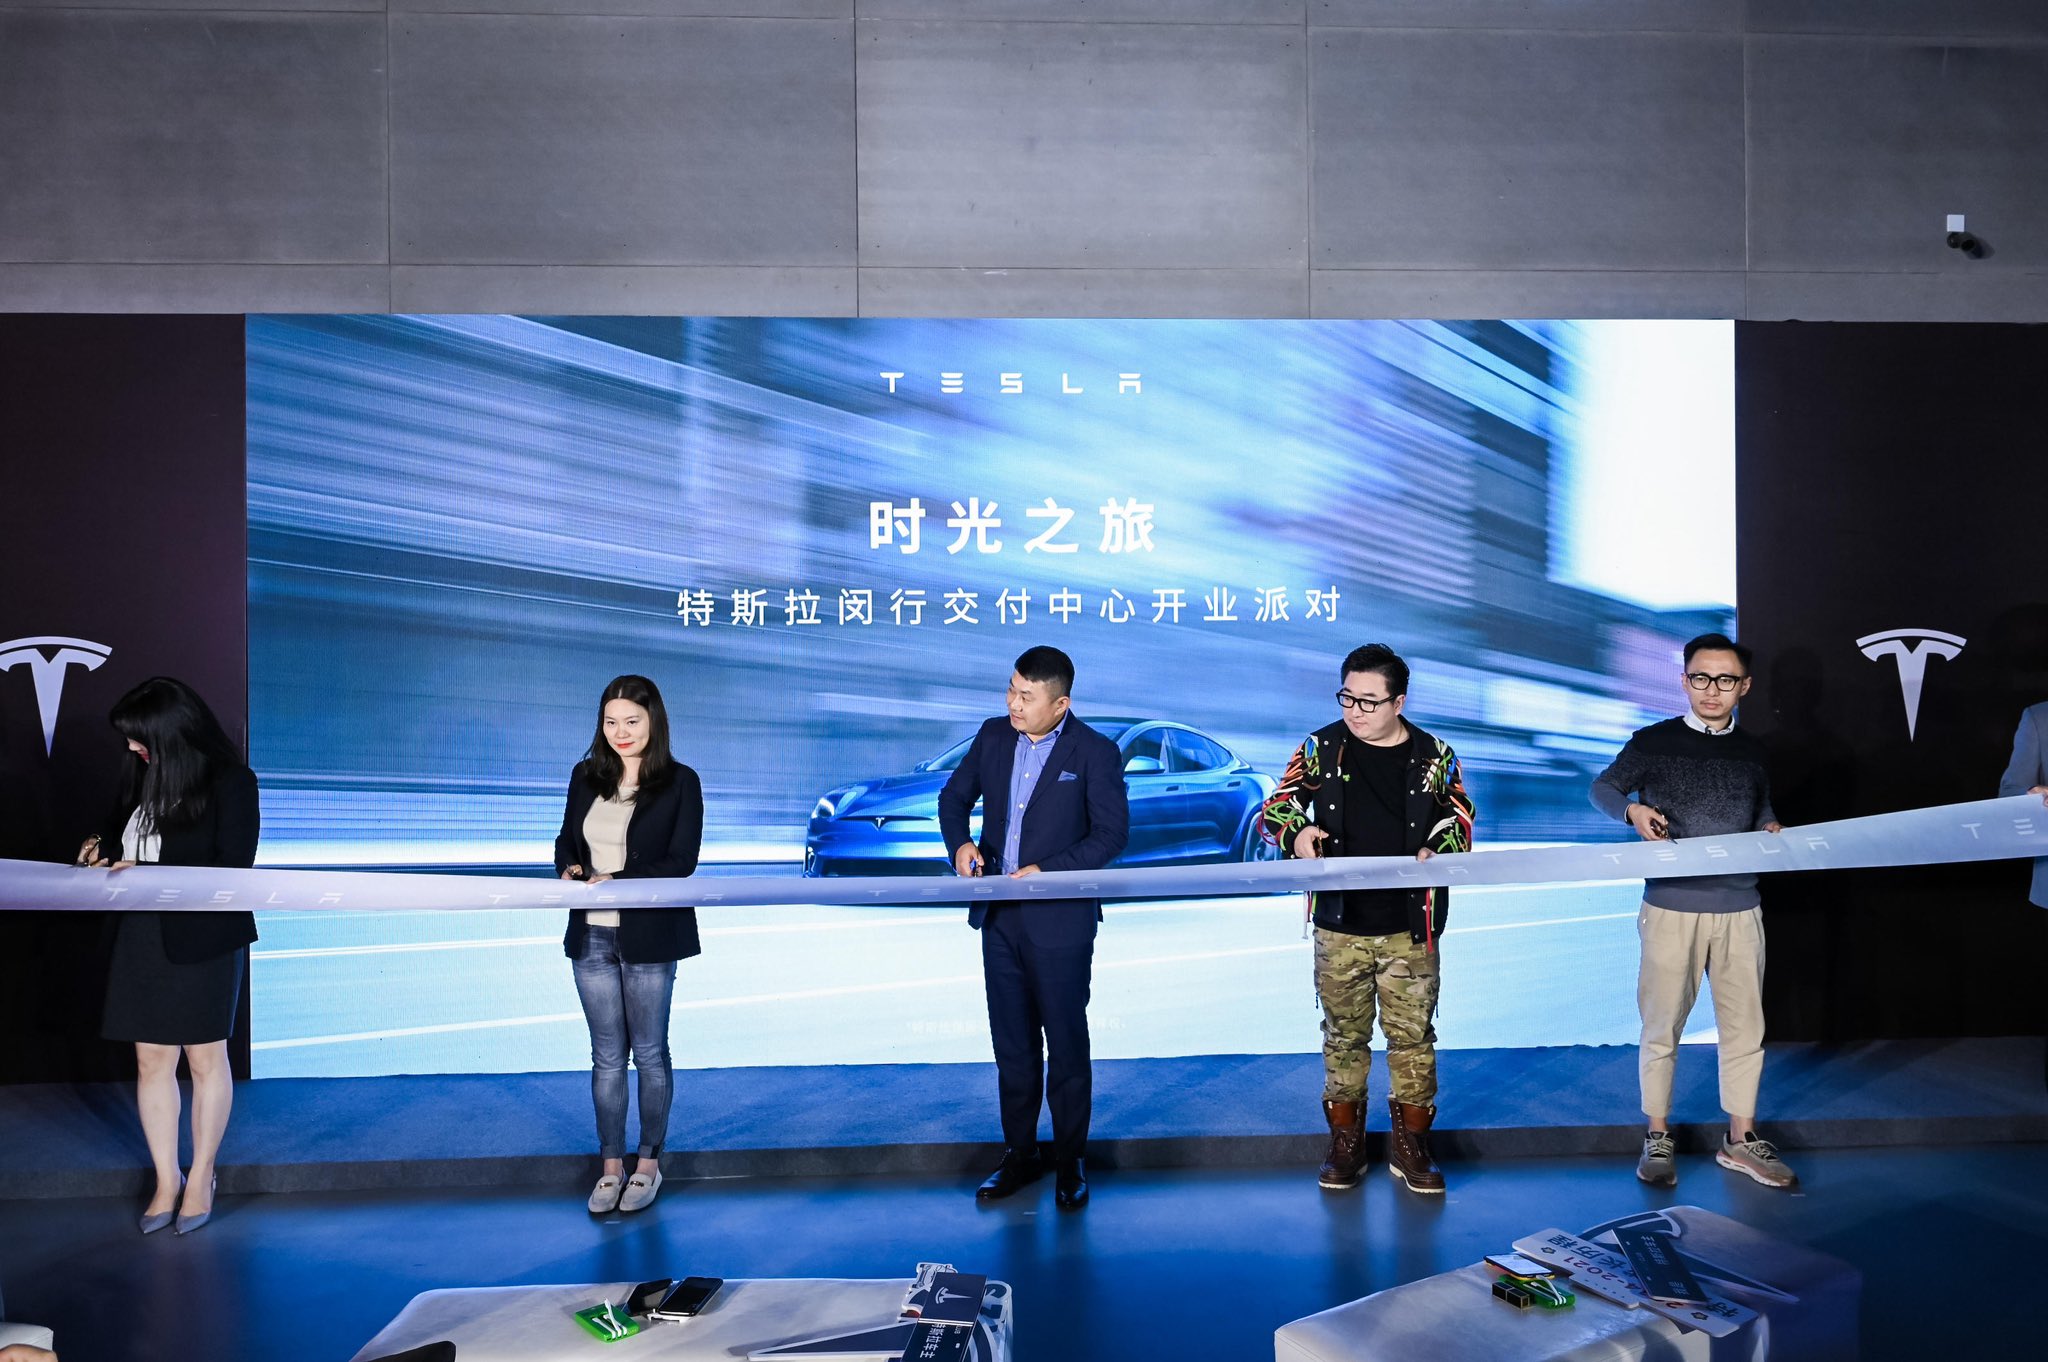 Tesla China’s launches new massive Delivery Center with Grand Opening Ceremony